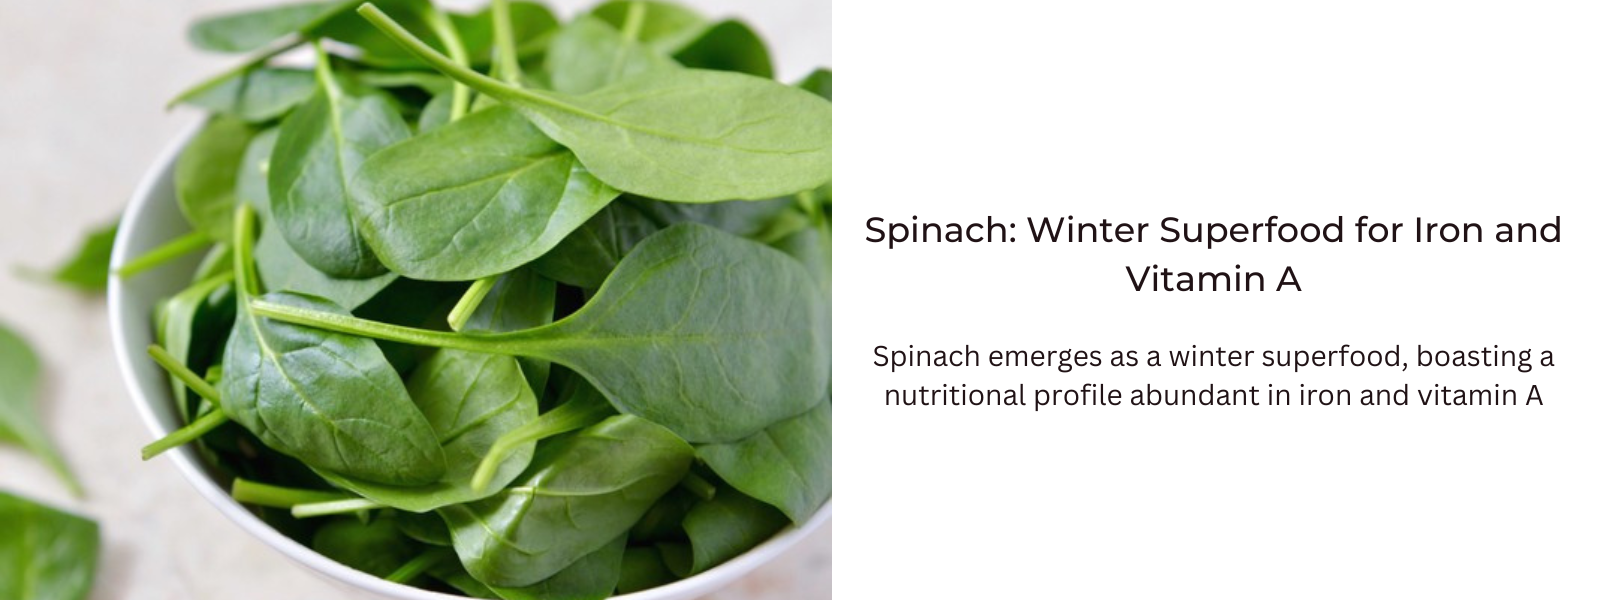 Spinach: Winter Superfood for Iron and Vitamin A